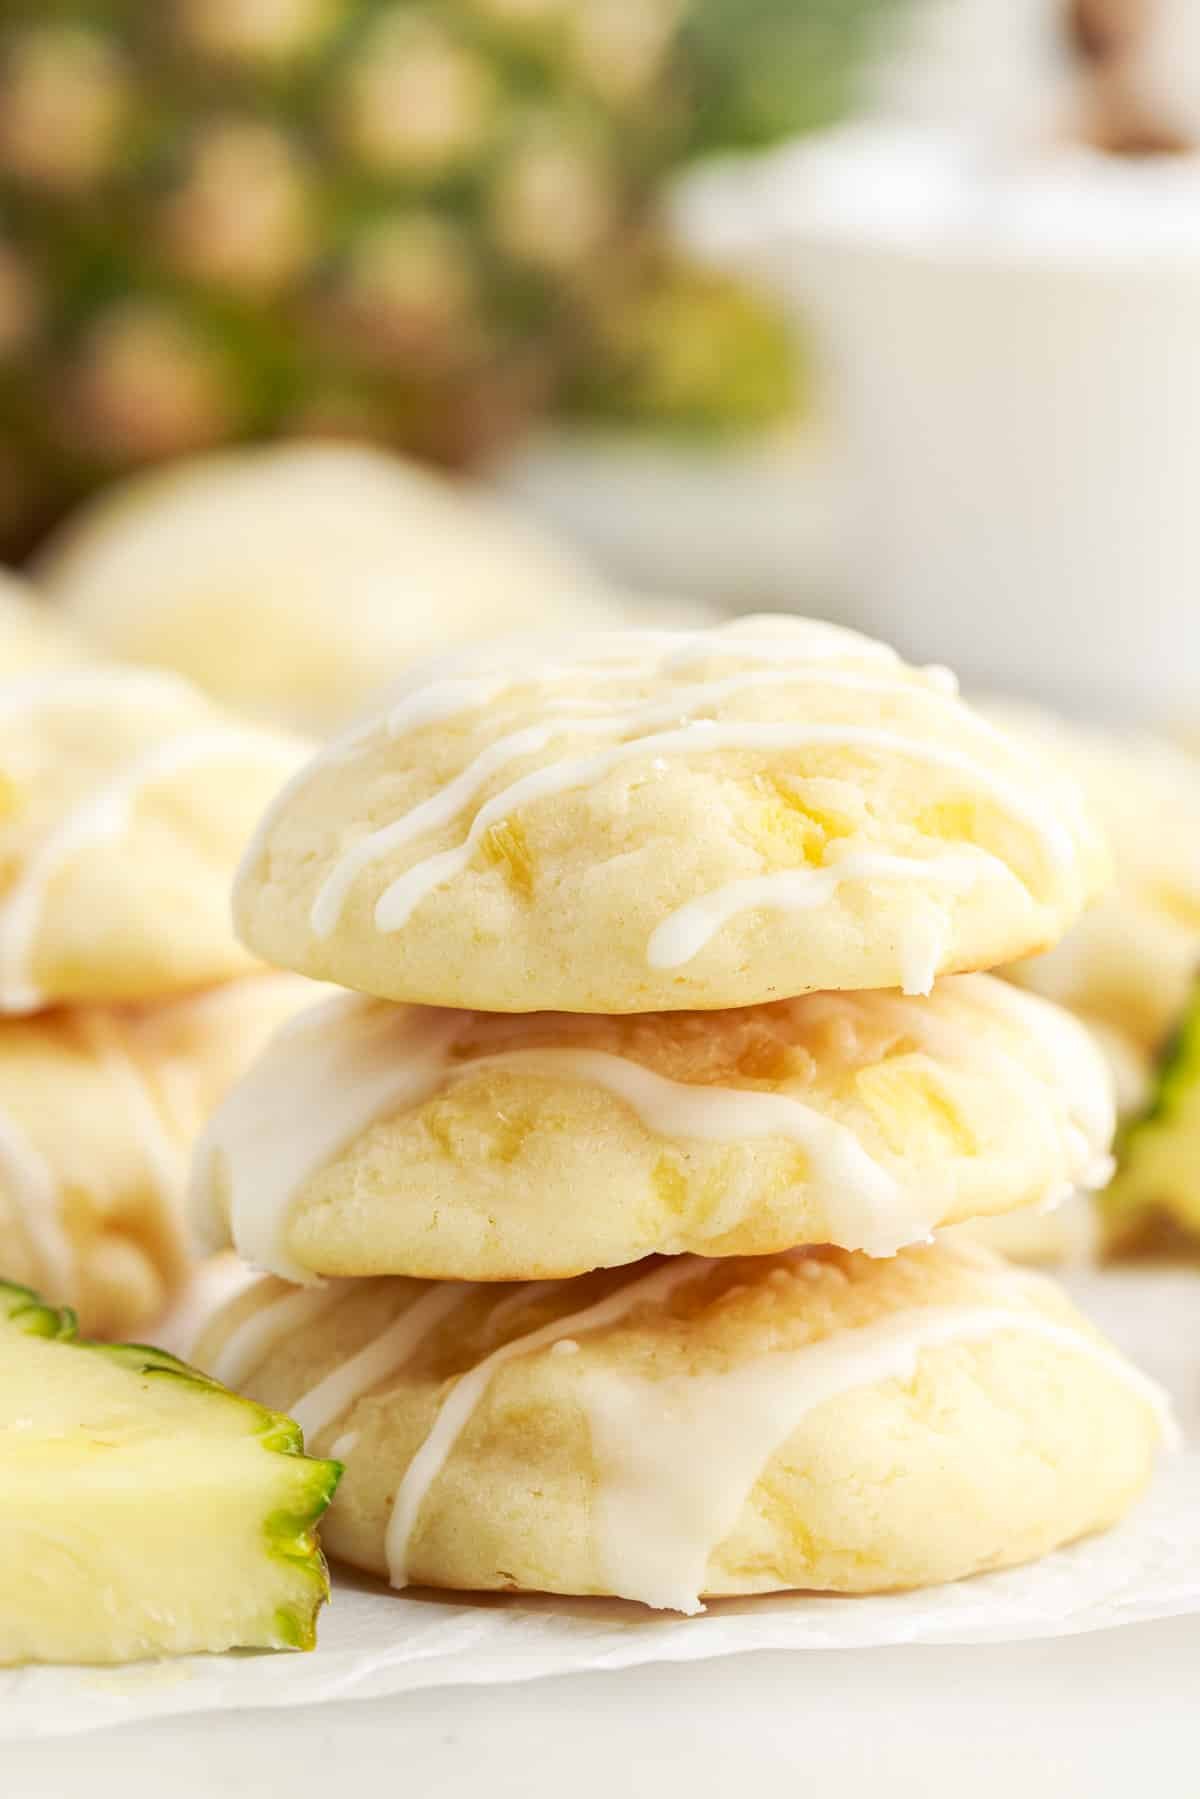 Pineapple Cookies stacked on each other.